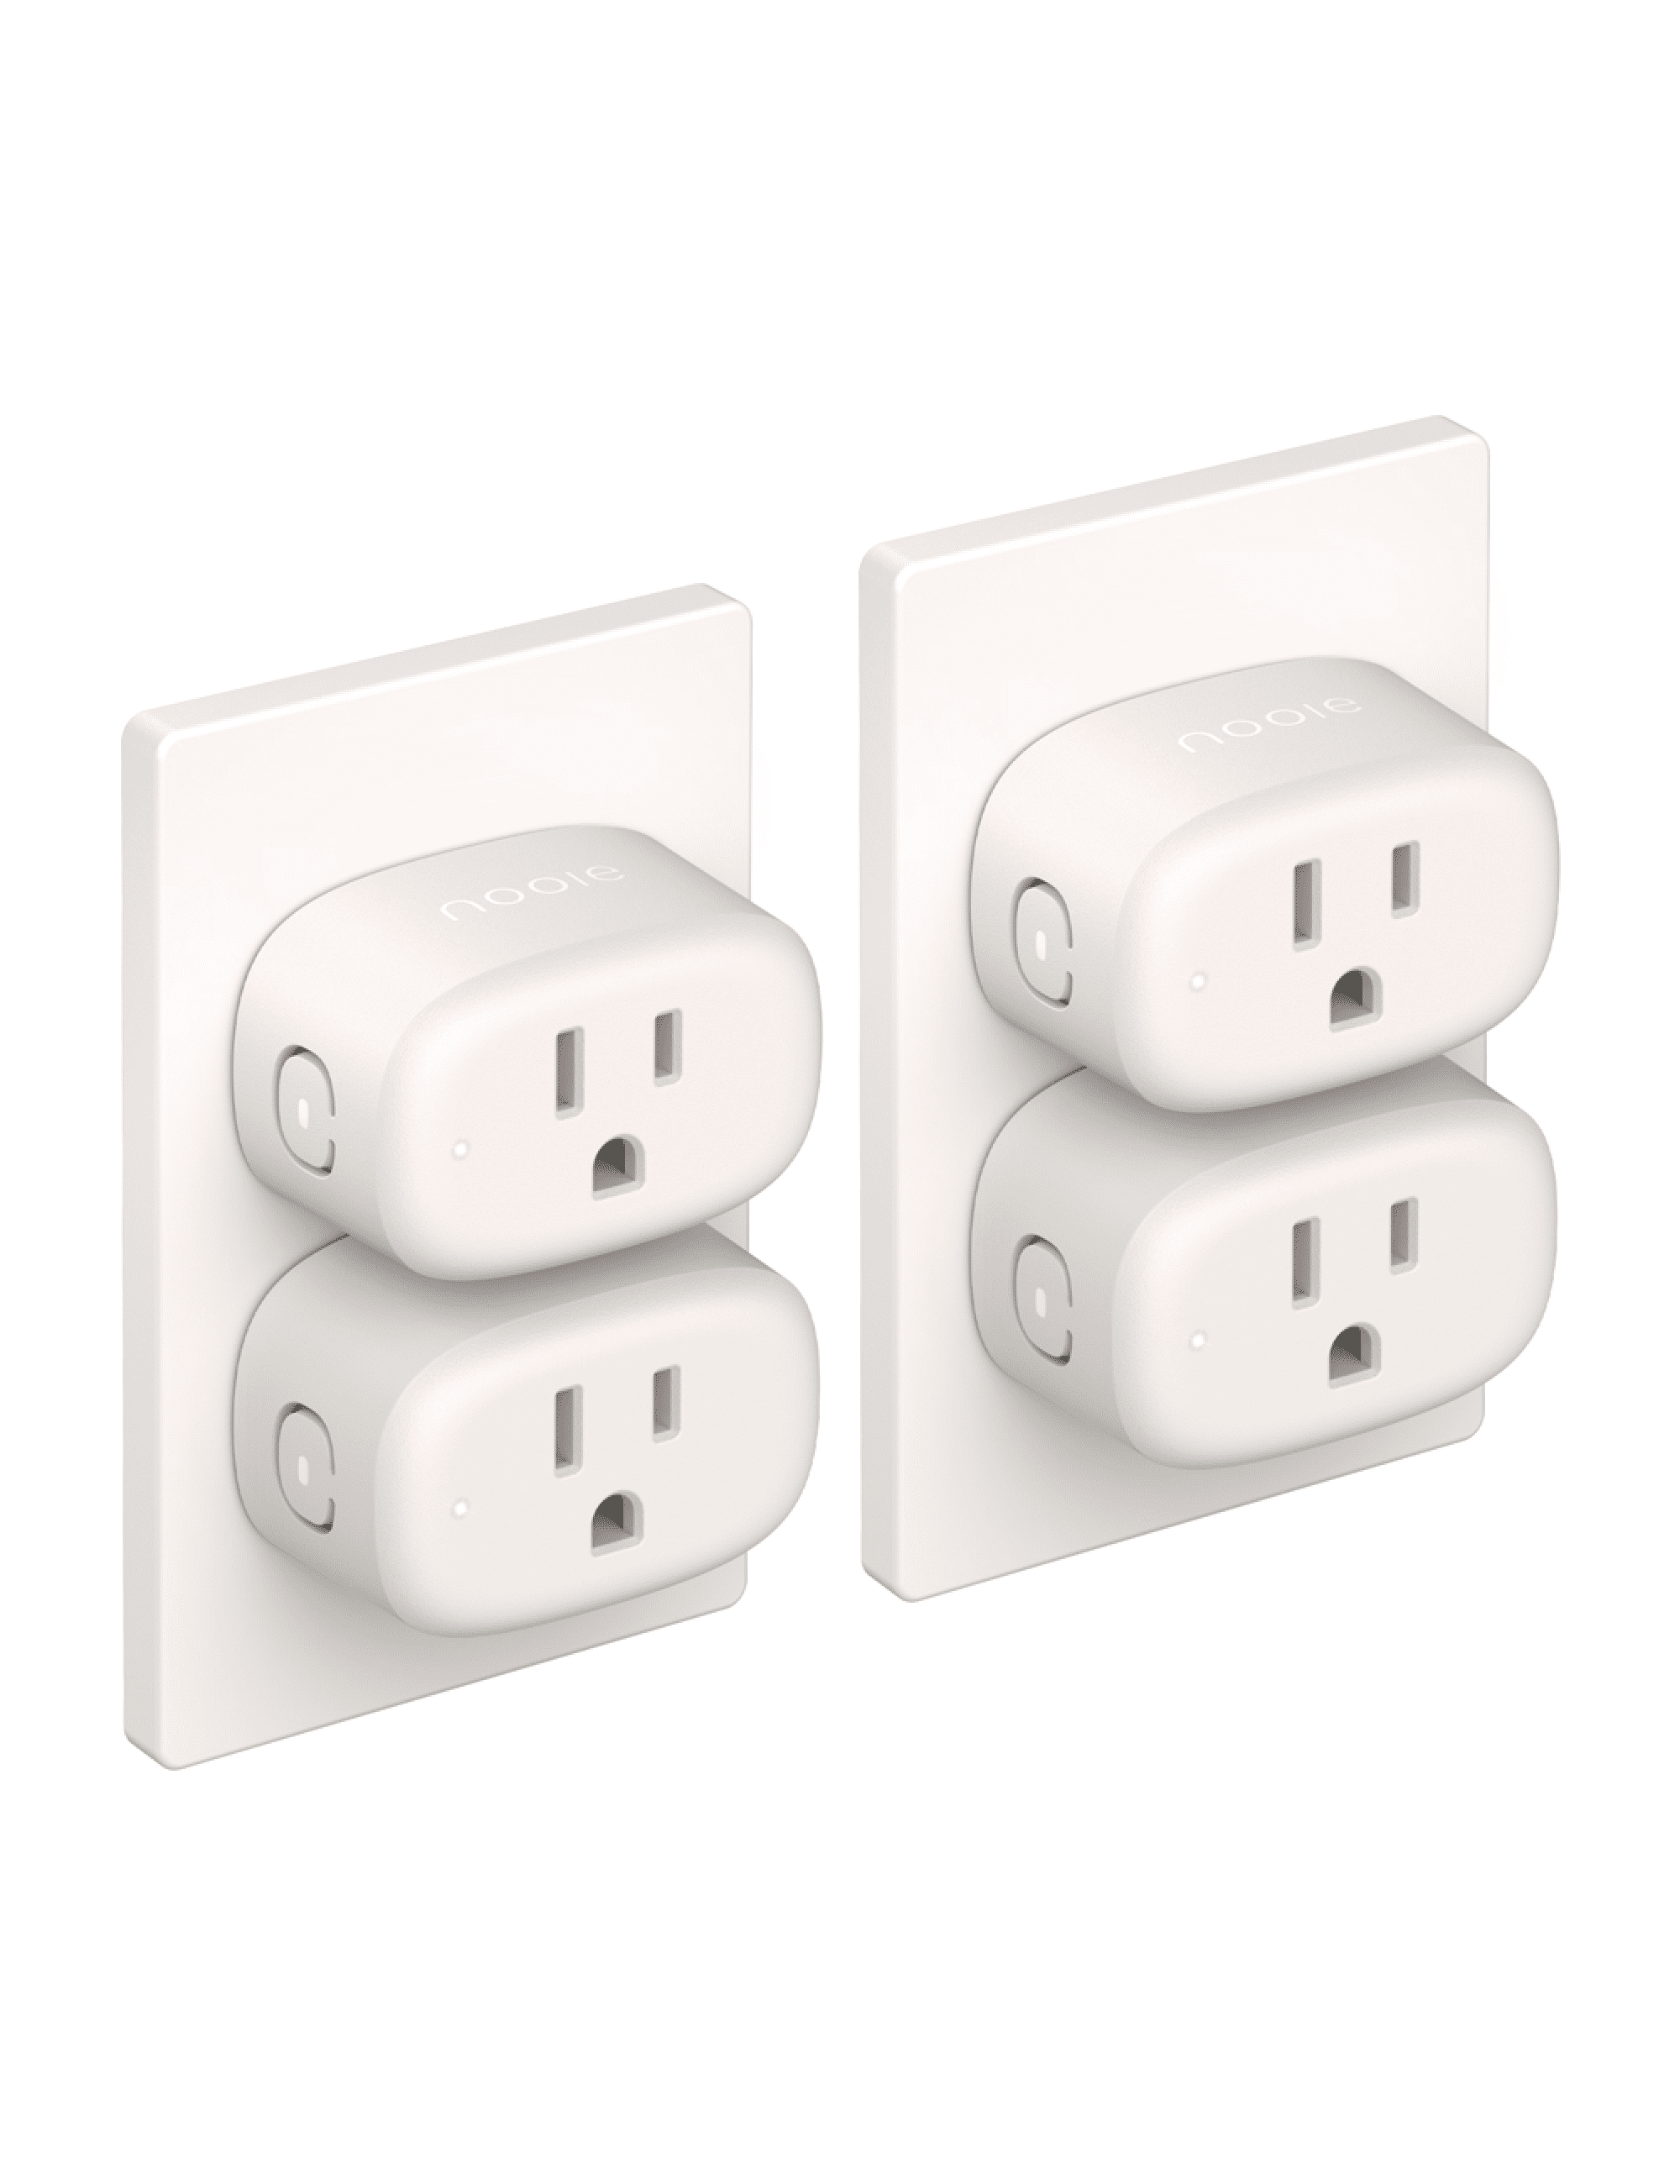 Energy Monitoring Dual Socket Smart Plugs That Work with Alexa Google Home  Siri, Wireless 2.4G WiFi Outlet Controlled by Smart Life Tuya Smartthings